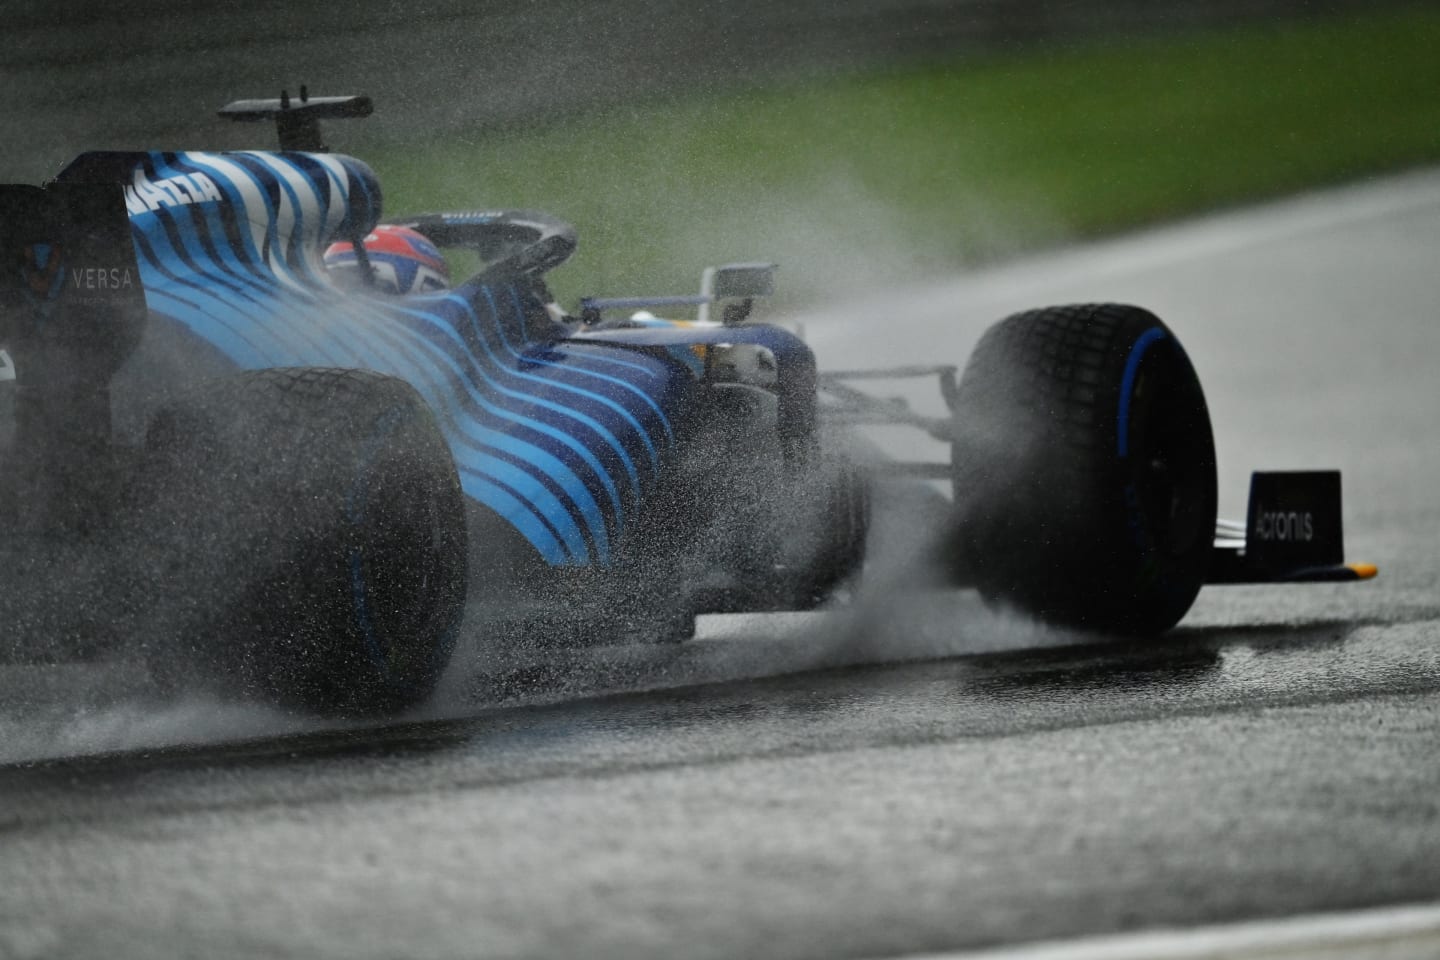 SPA, BELGIUM - AUGUST 28: Rain sprays around George Russell of Great Britain driving the (63) Williams Racing FW43B Mercedes during qualifying ahead of the F1 Grand Prix of Belgium at Circuit de Spa-Francorchamps on August 28, 2021 in Spa, Belgium. (Photo by Dan Mullan/Getty Images)